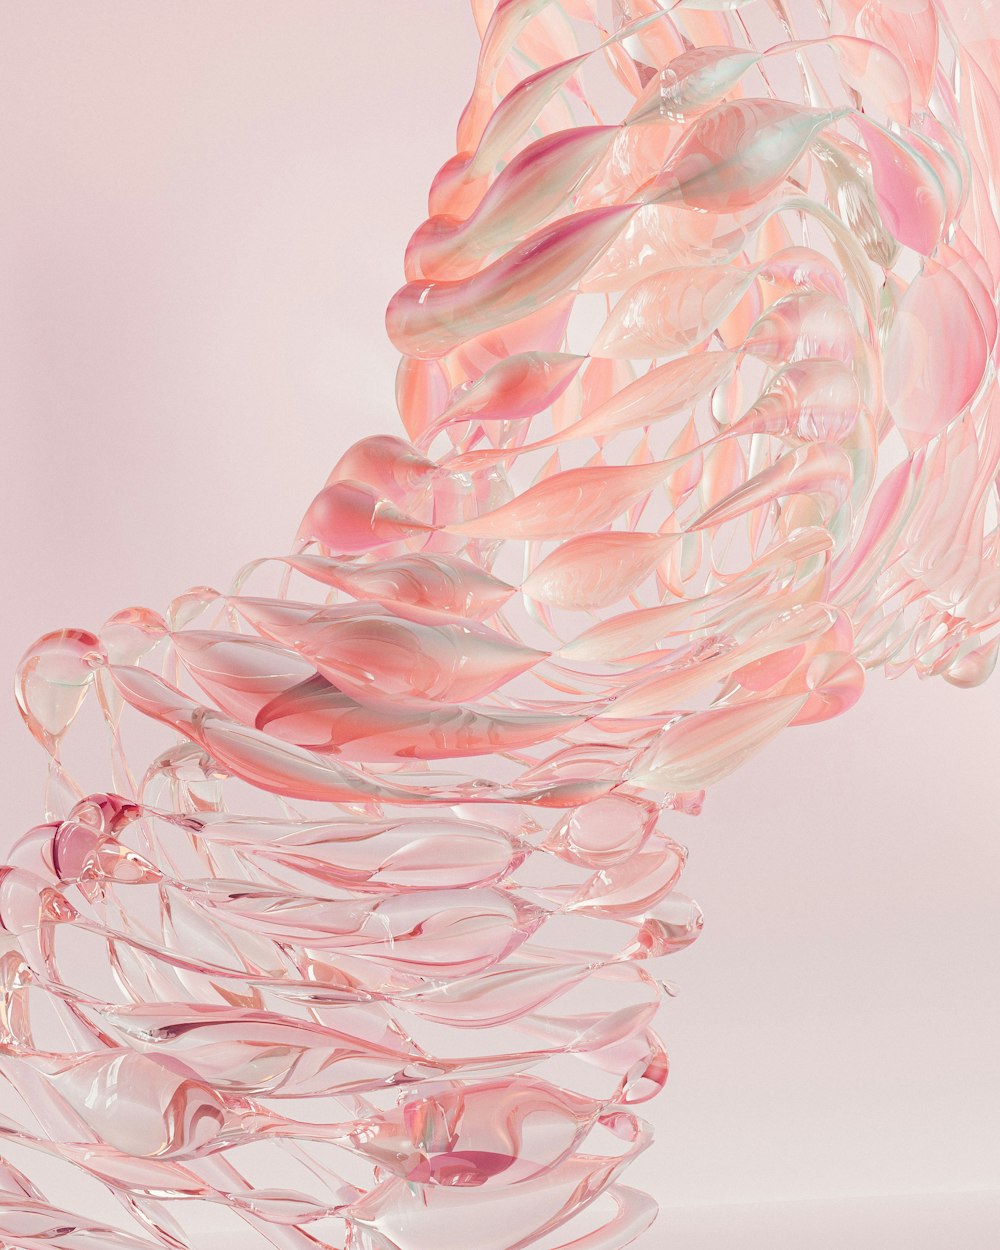 a sculpture made of pink and white glass